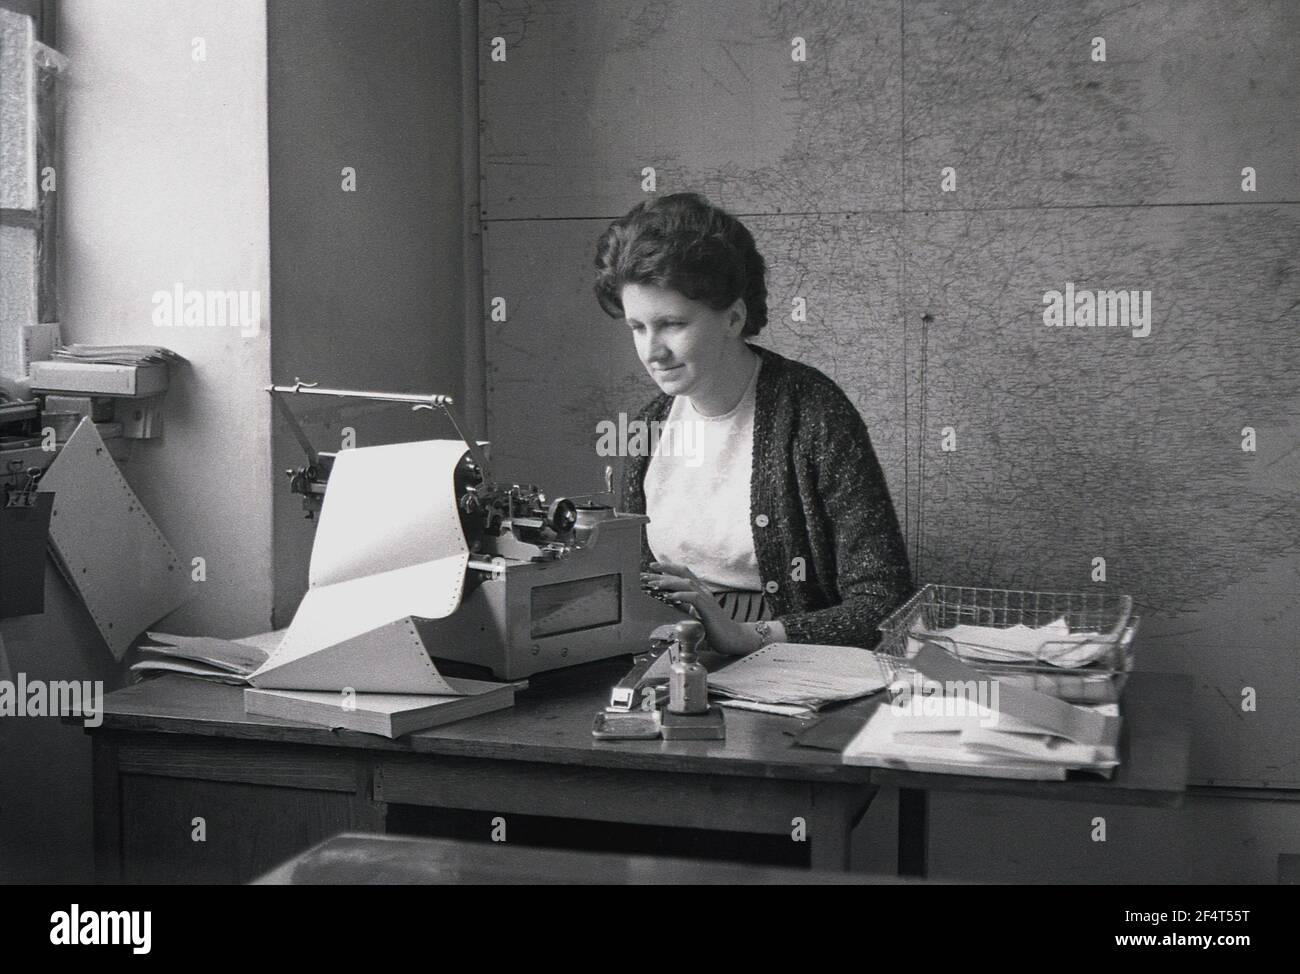 1964, historical, inside an office at a trading company on an industrial estate, a lady administrator sitting at a wooden desk using a typewriter, England, UK. A large map of Britain displayed on the wall behind her. Stock Photo